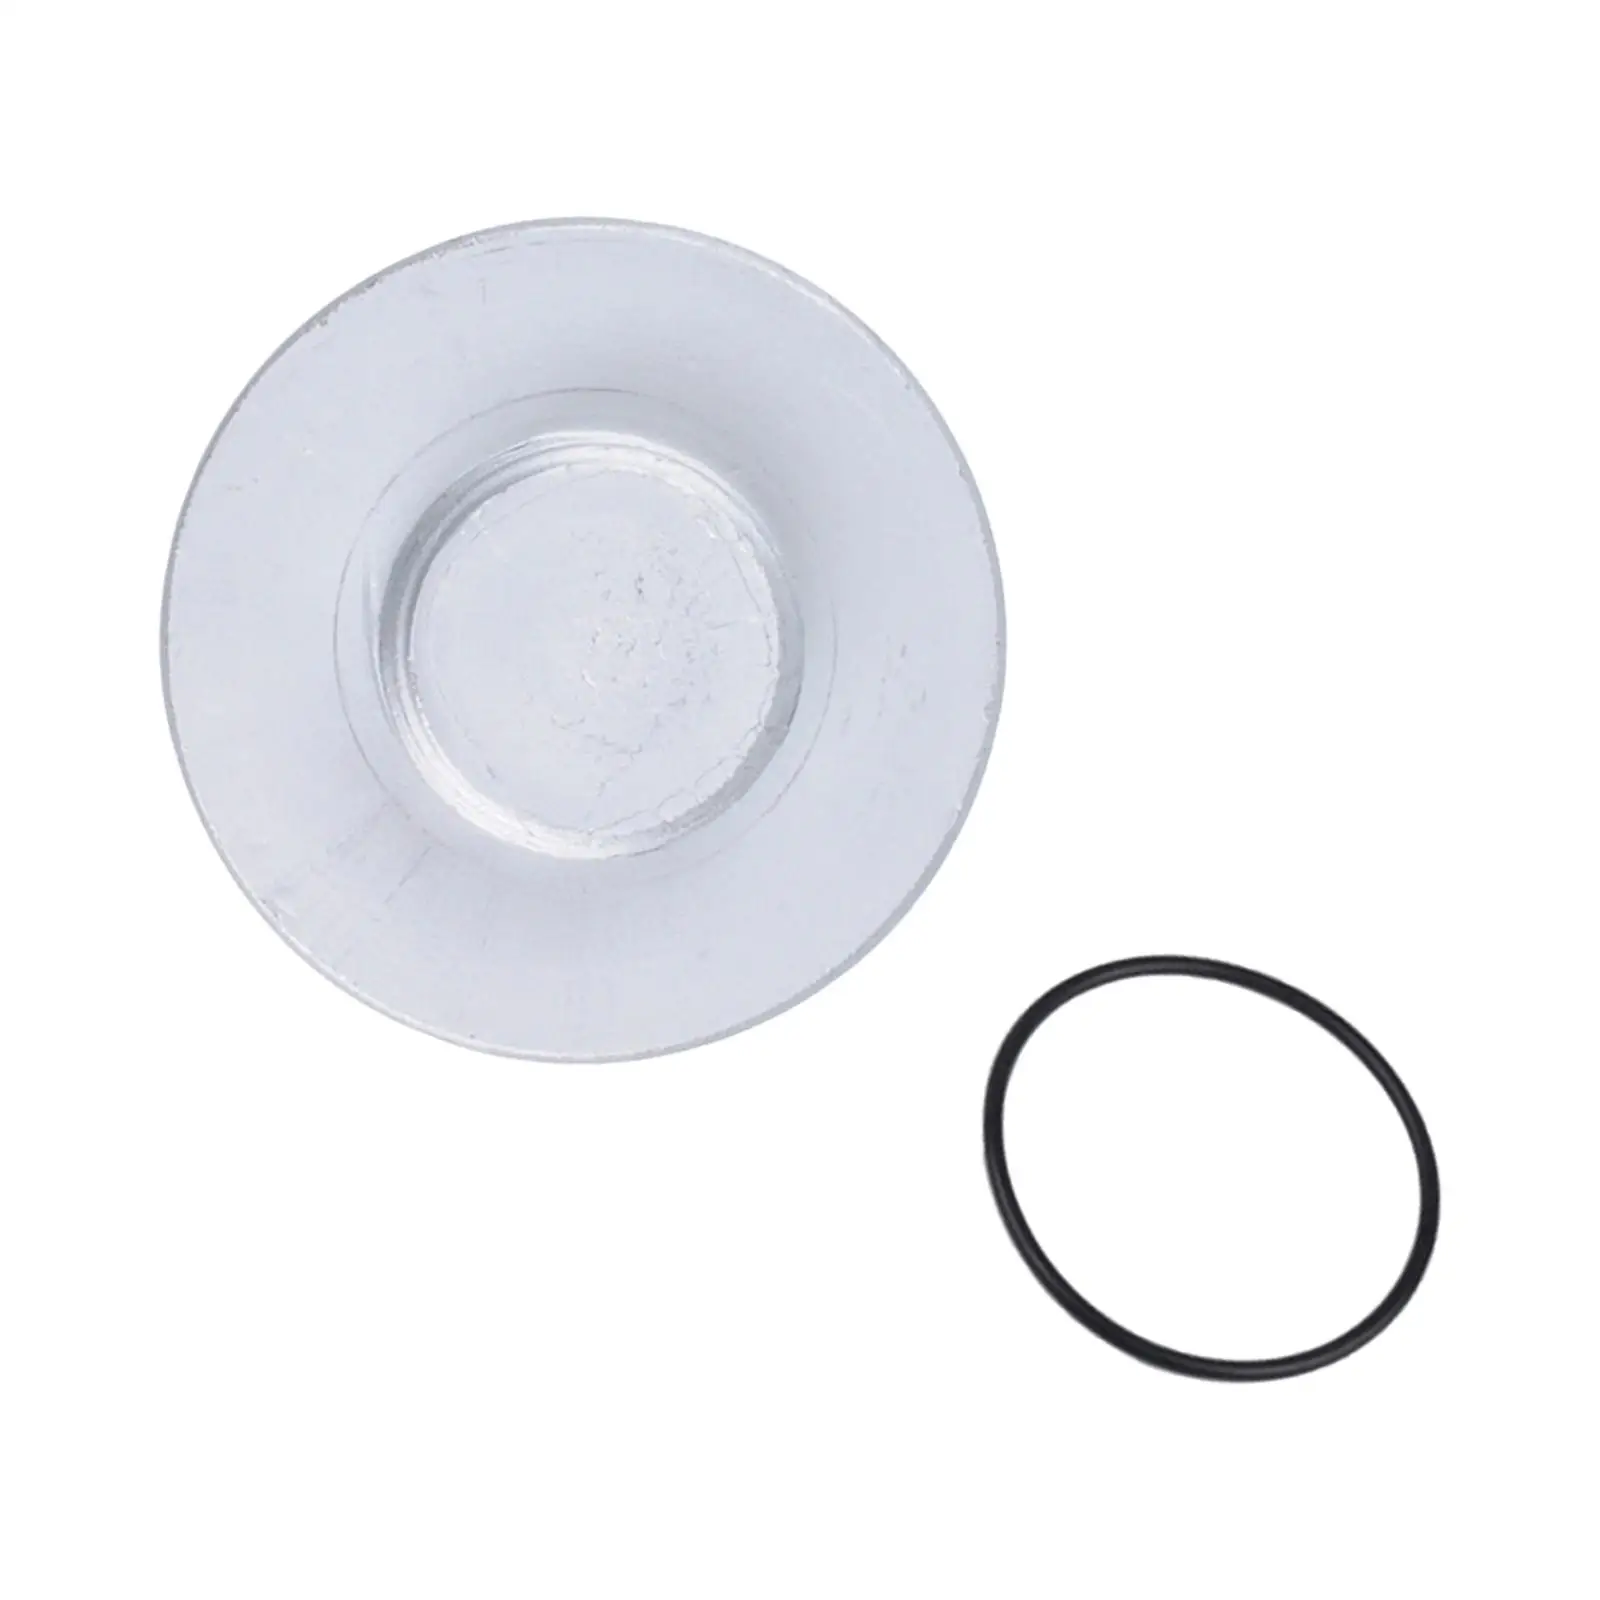  Housing Cover Replacement Drain Plug Interchange Parts for  IQ 2012-2013